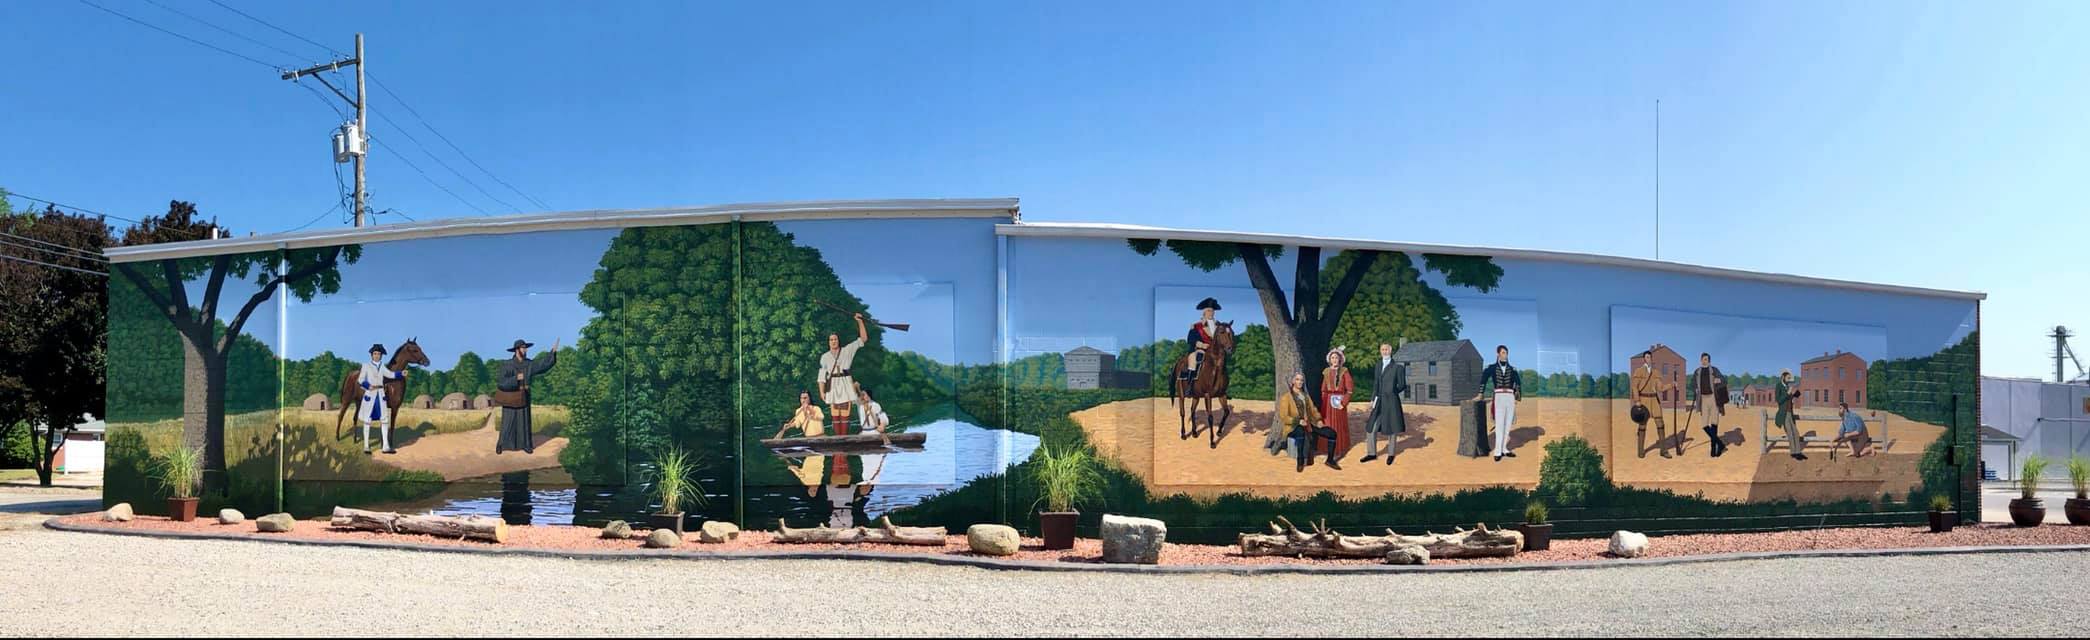 mural completed 2020